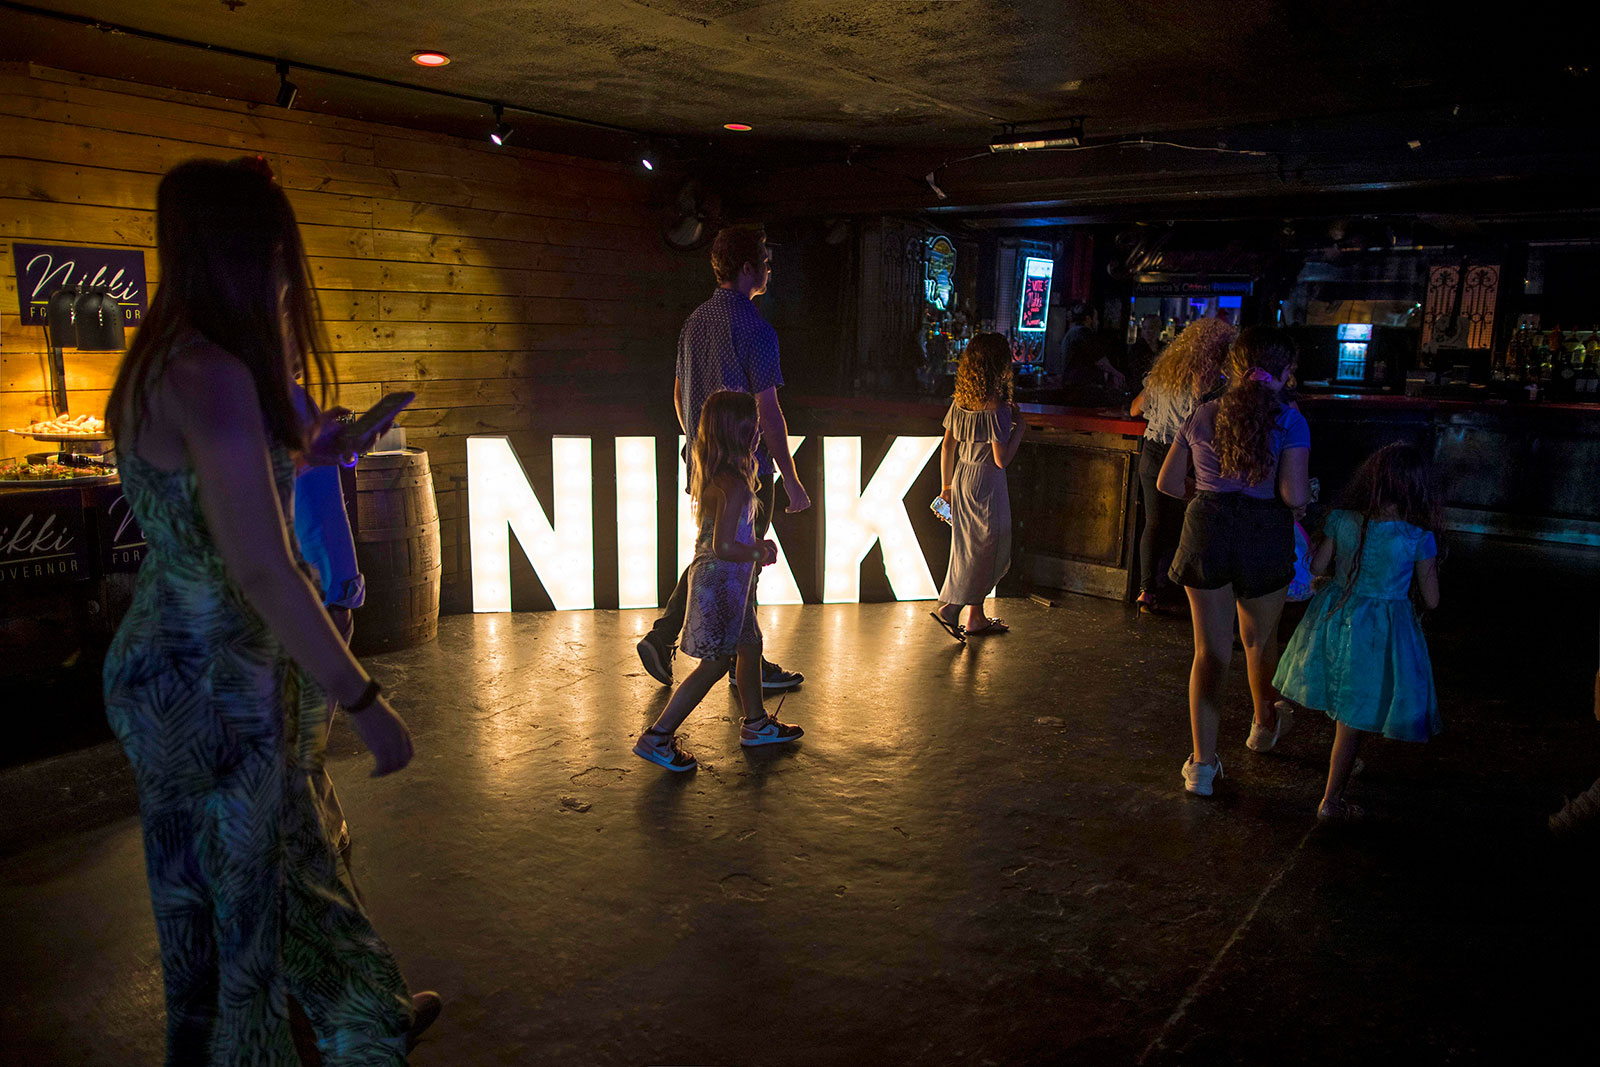 People walk past a sign spelling ‘Nikki’ at an election night event for Agriculture Commissioner Nikki Fried on Tuesday.